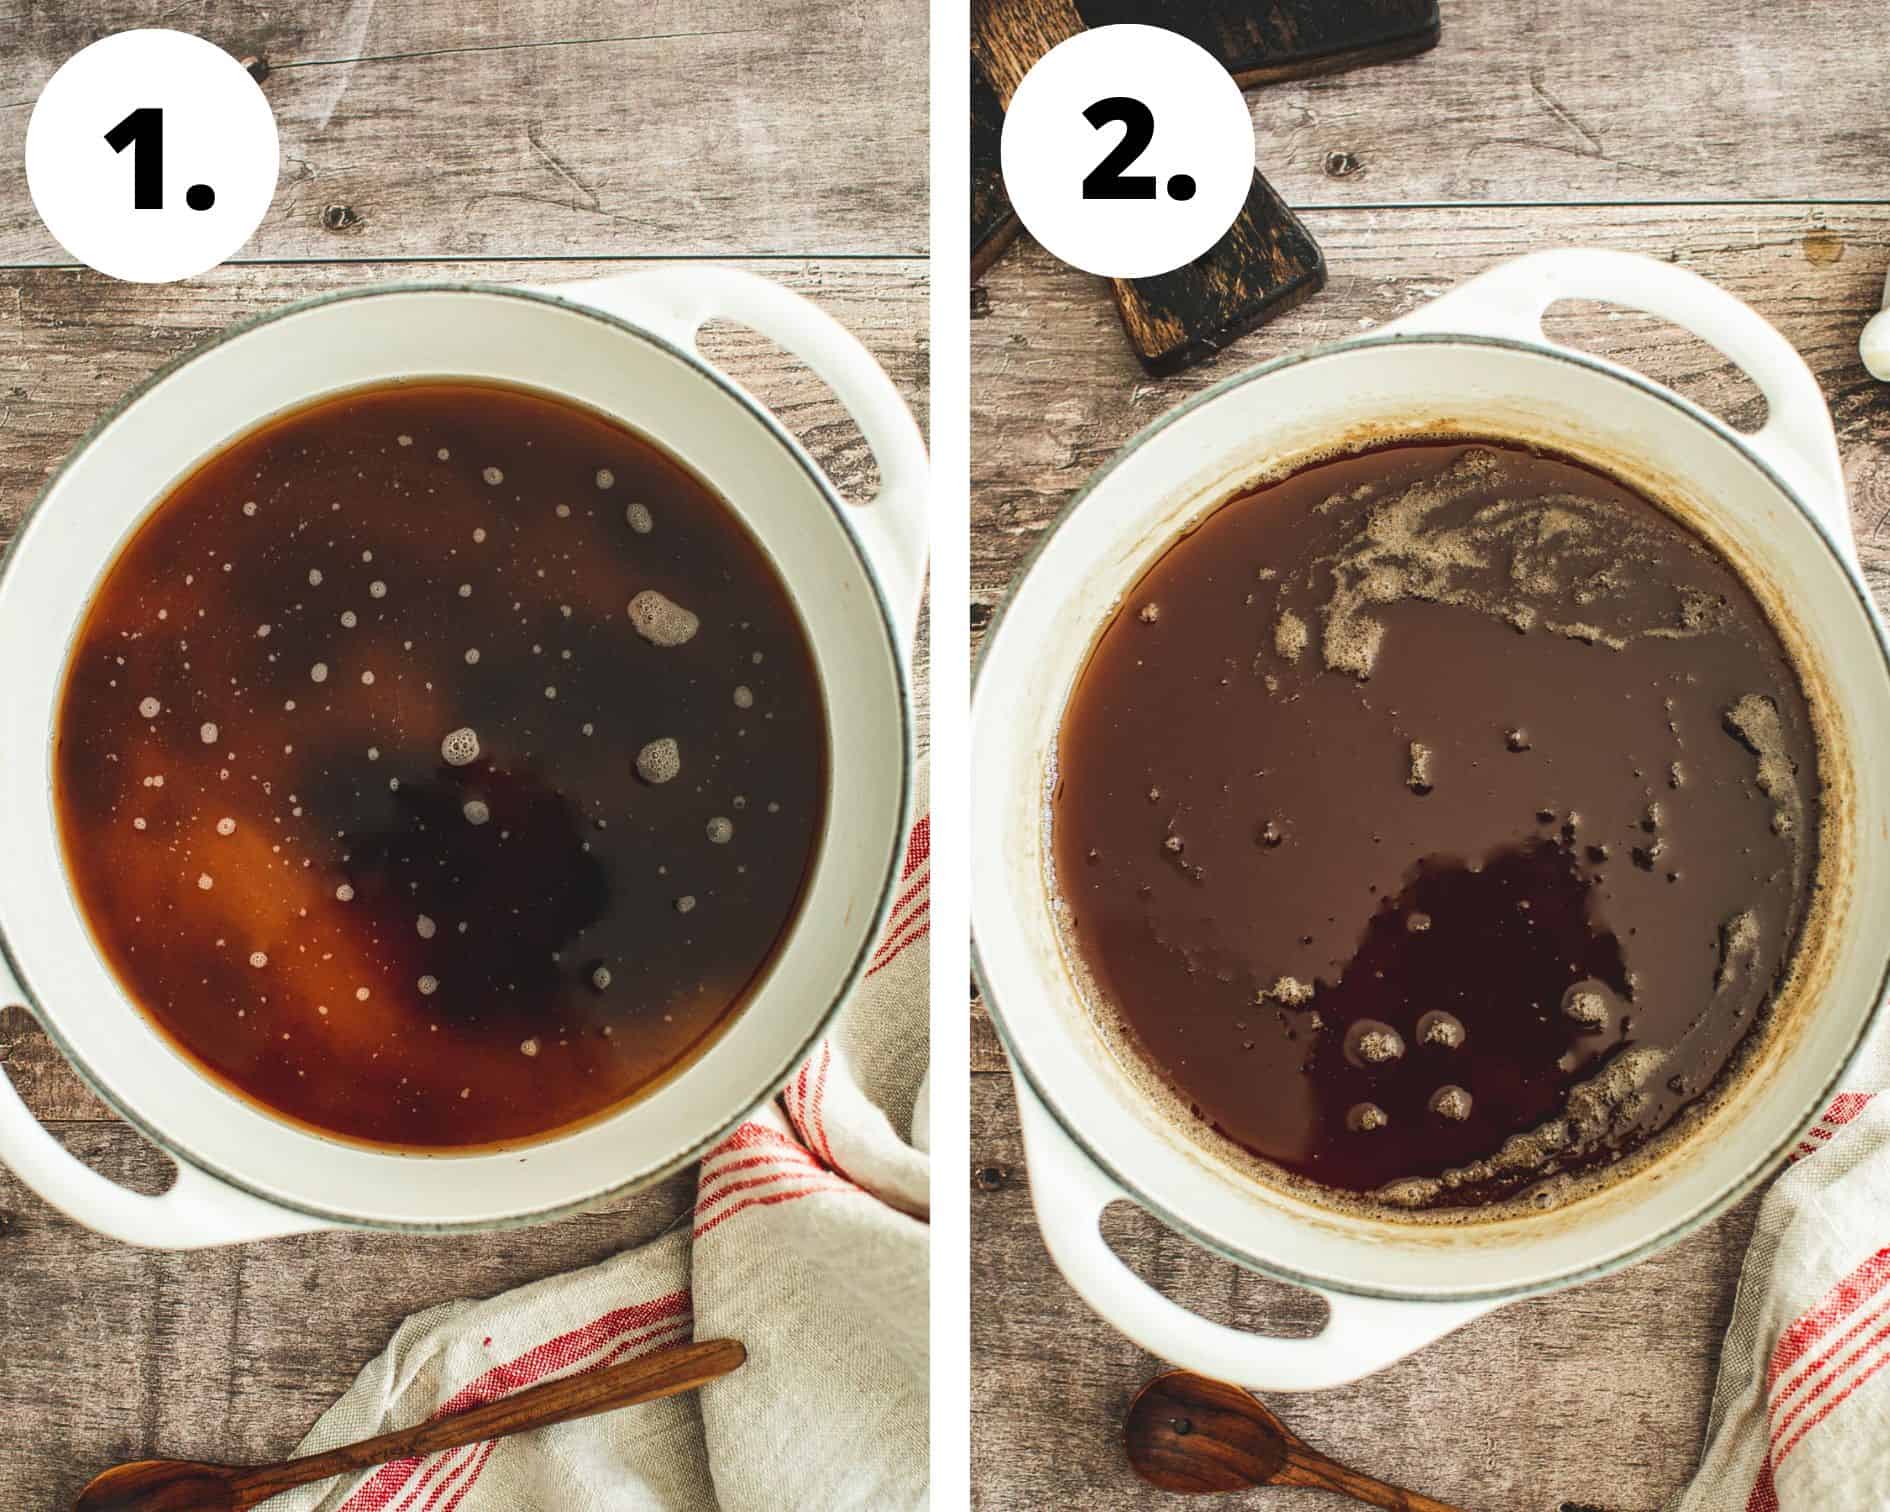 Maple syrup process steps 1 and 2.